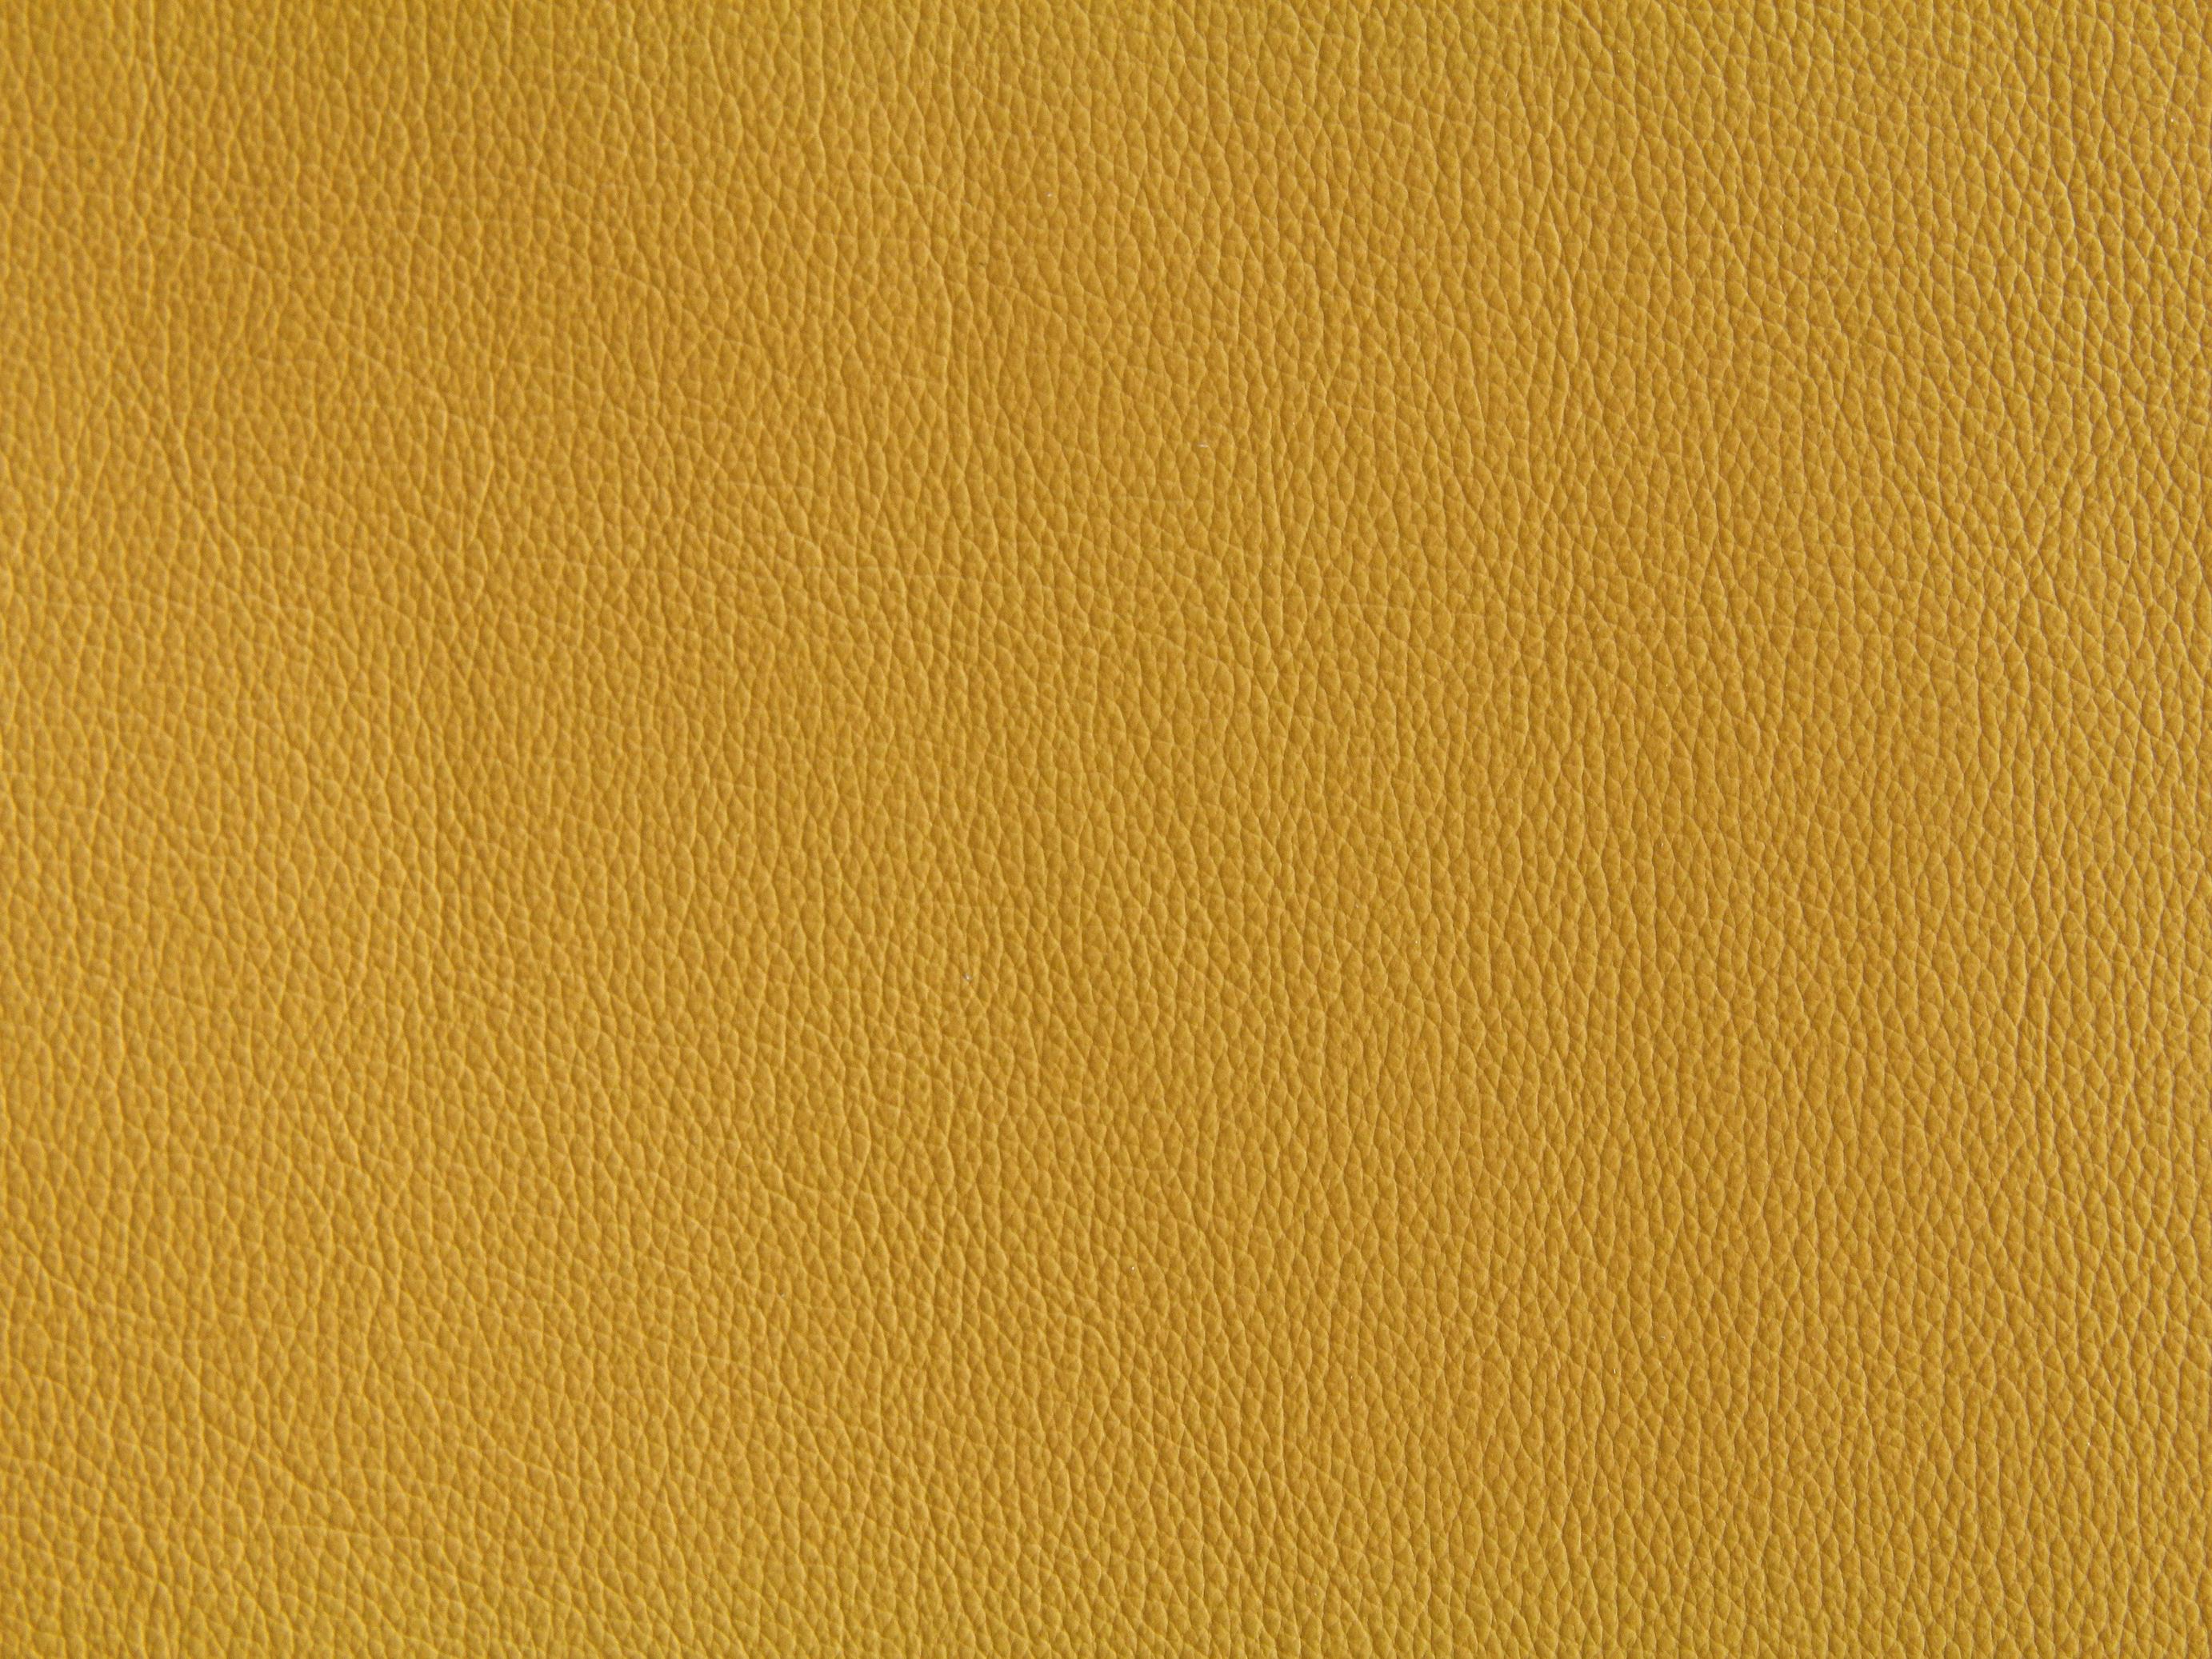 yellow leather texture wallpaper fabric material design bright